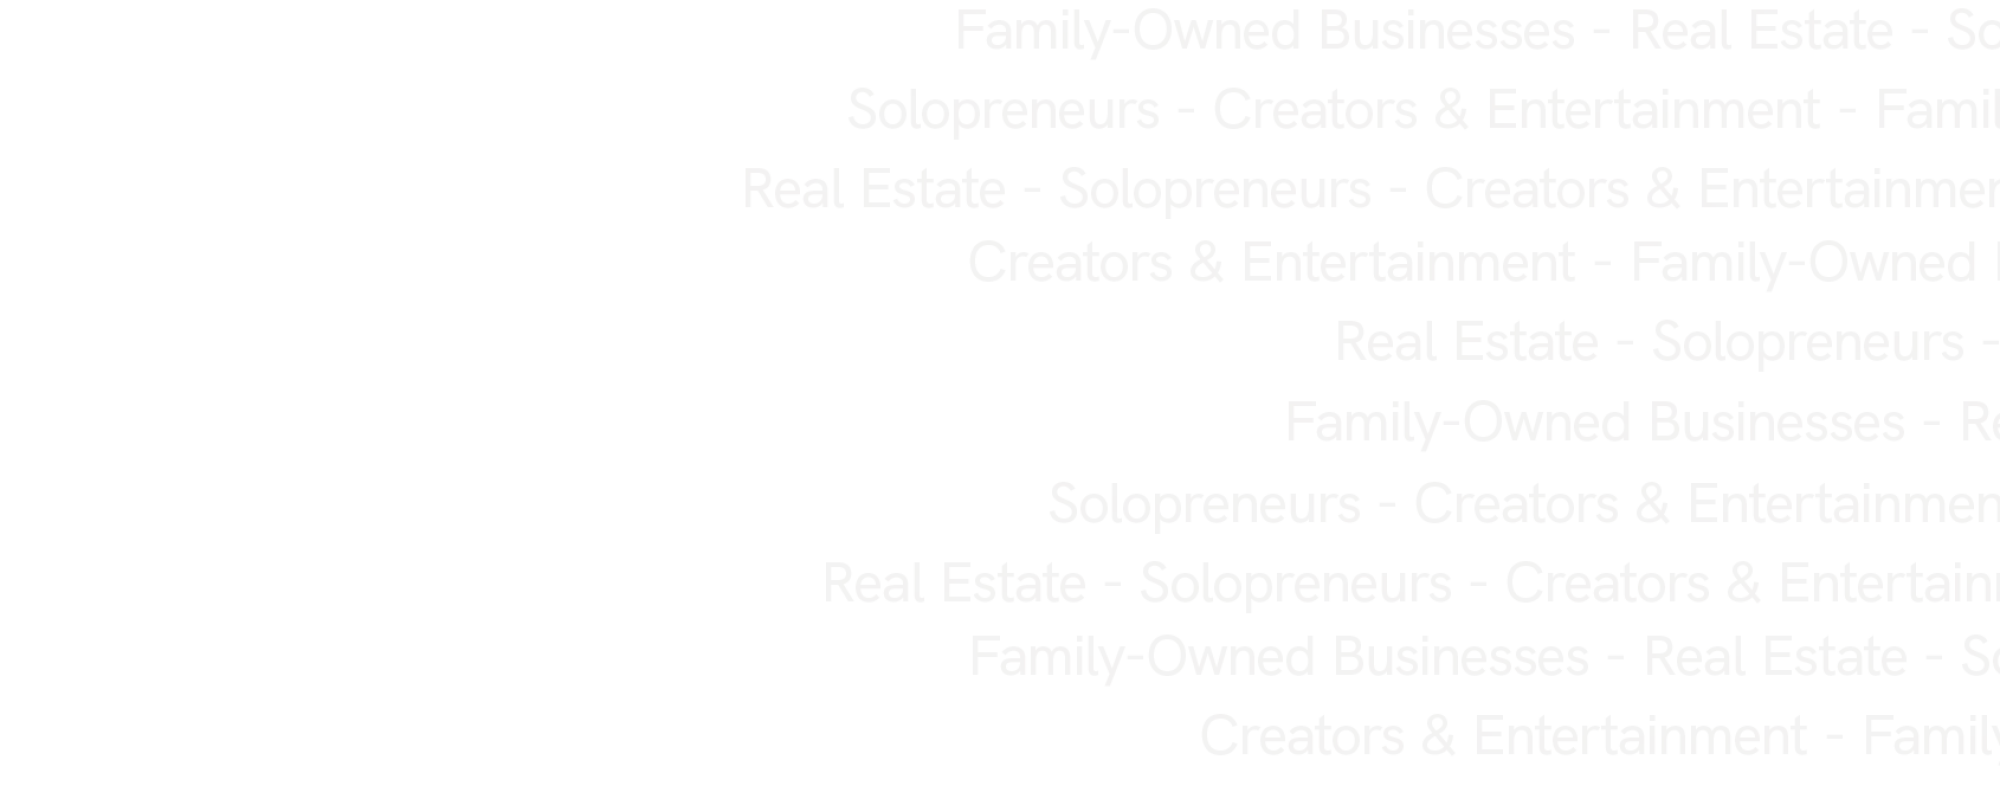 services-private-companies-word-collage